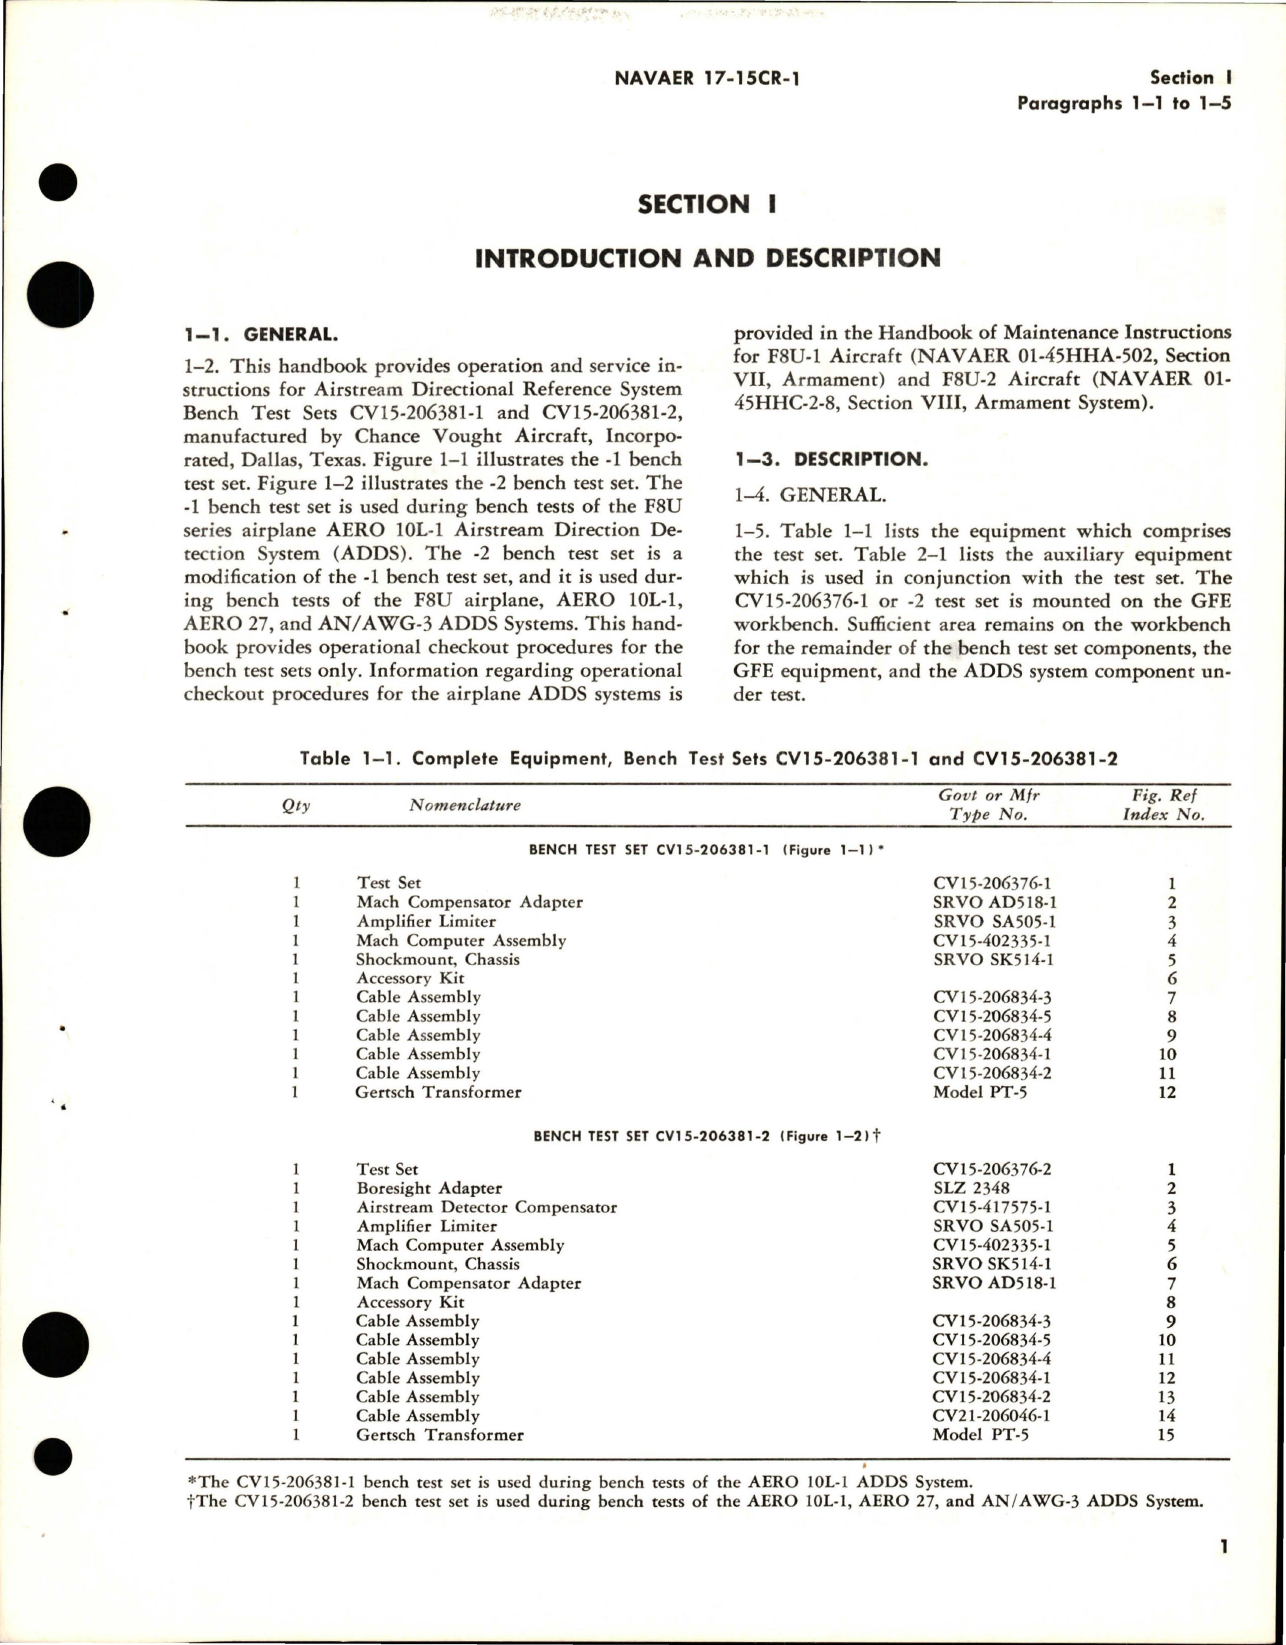 Sample page 7 from AirCorps Library document: Operation and Service Instructions with Illustrated Parts for Airstream Directional Reference System Bench Test Sets - CV15-206381-1 and CV15-206381-2 